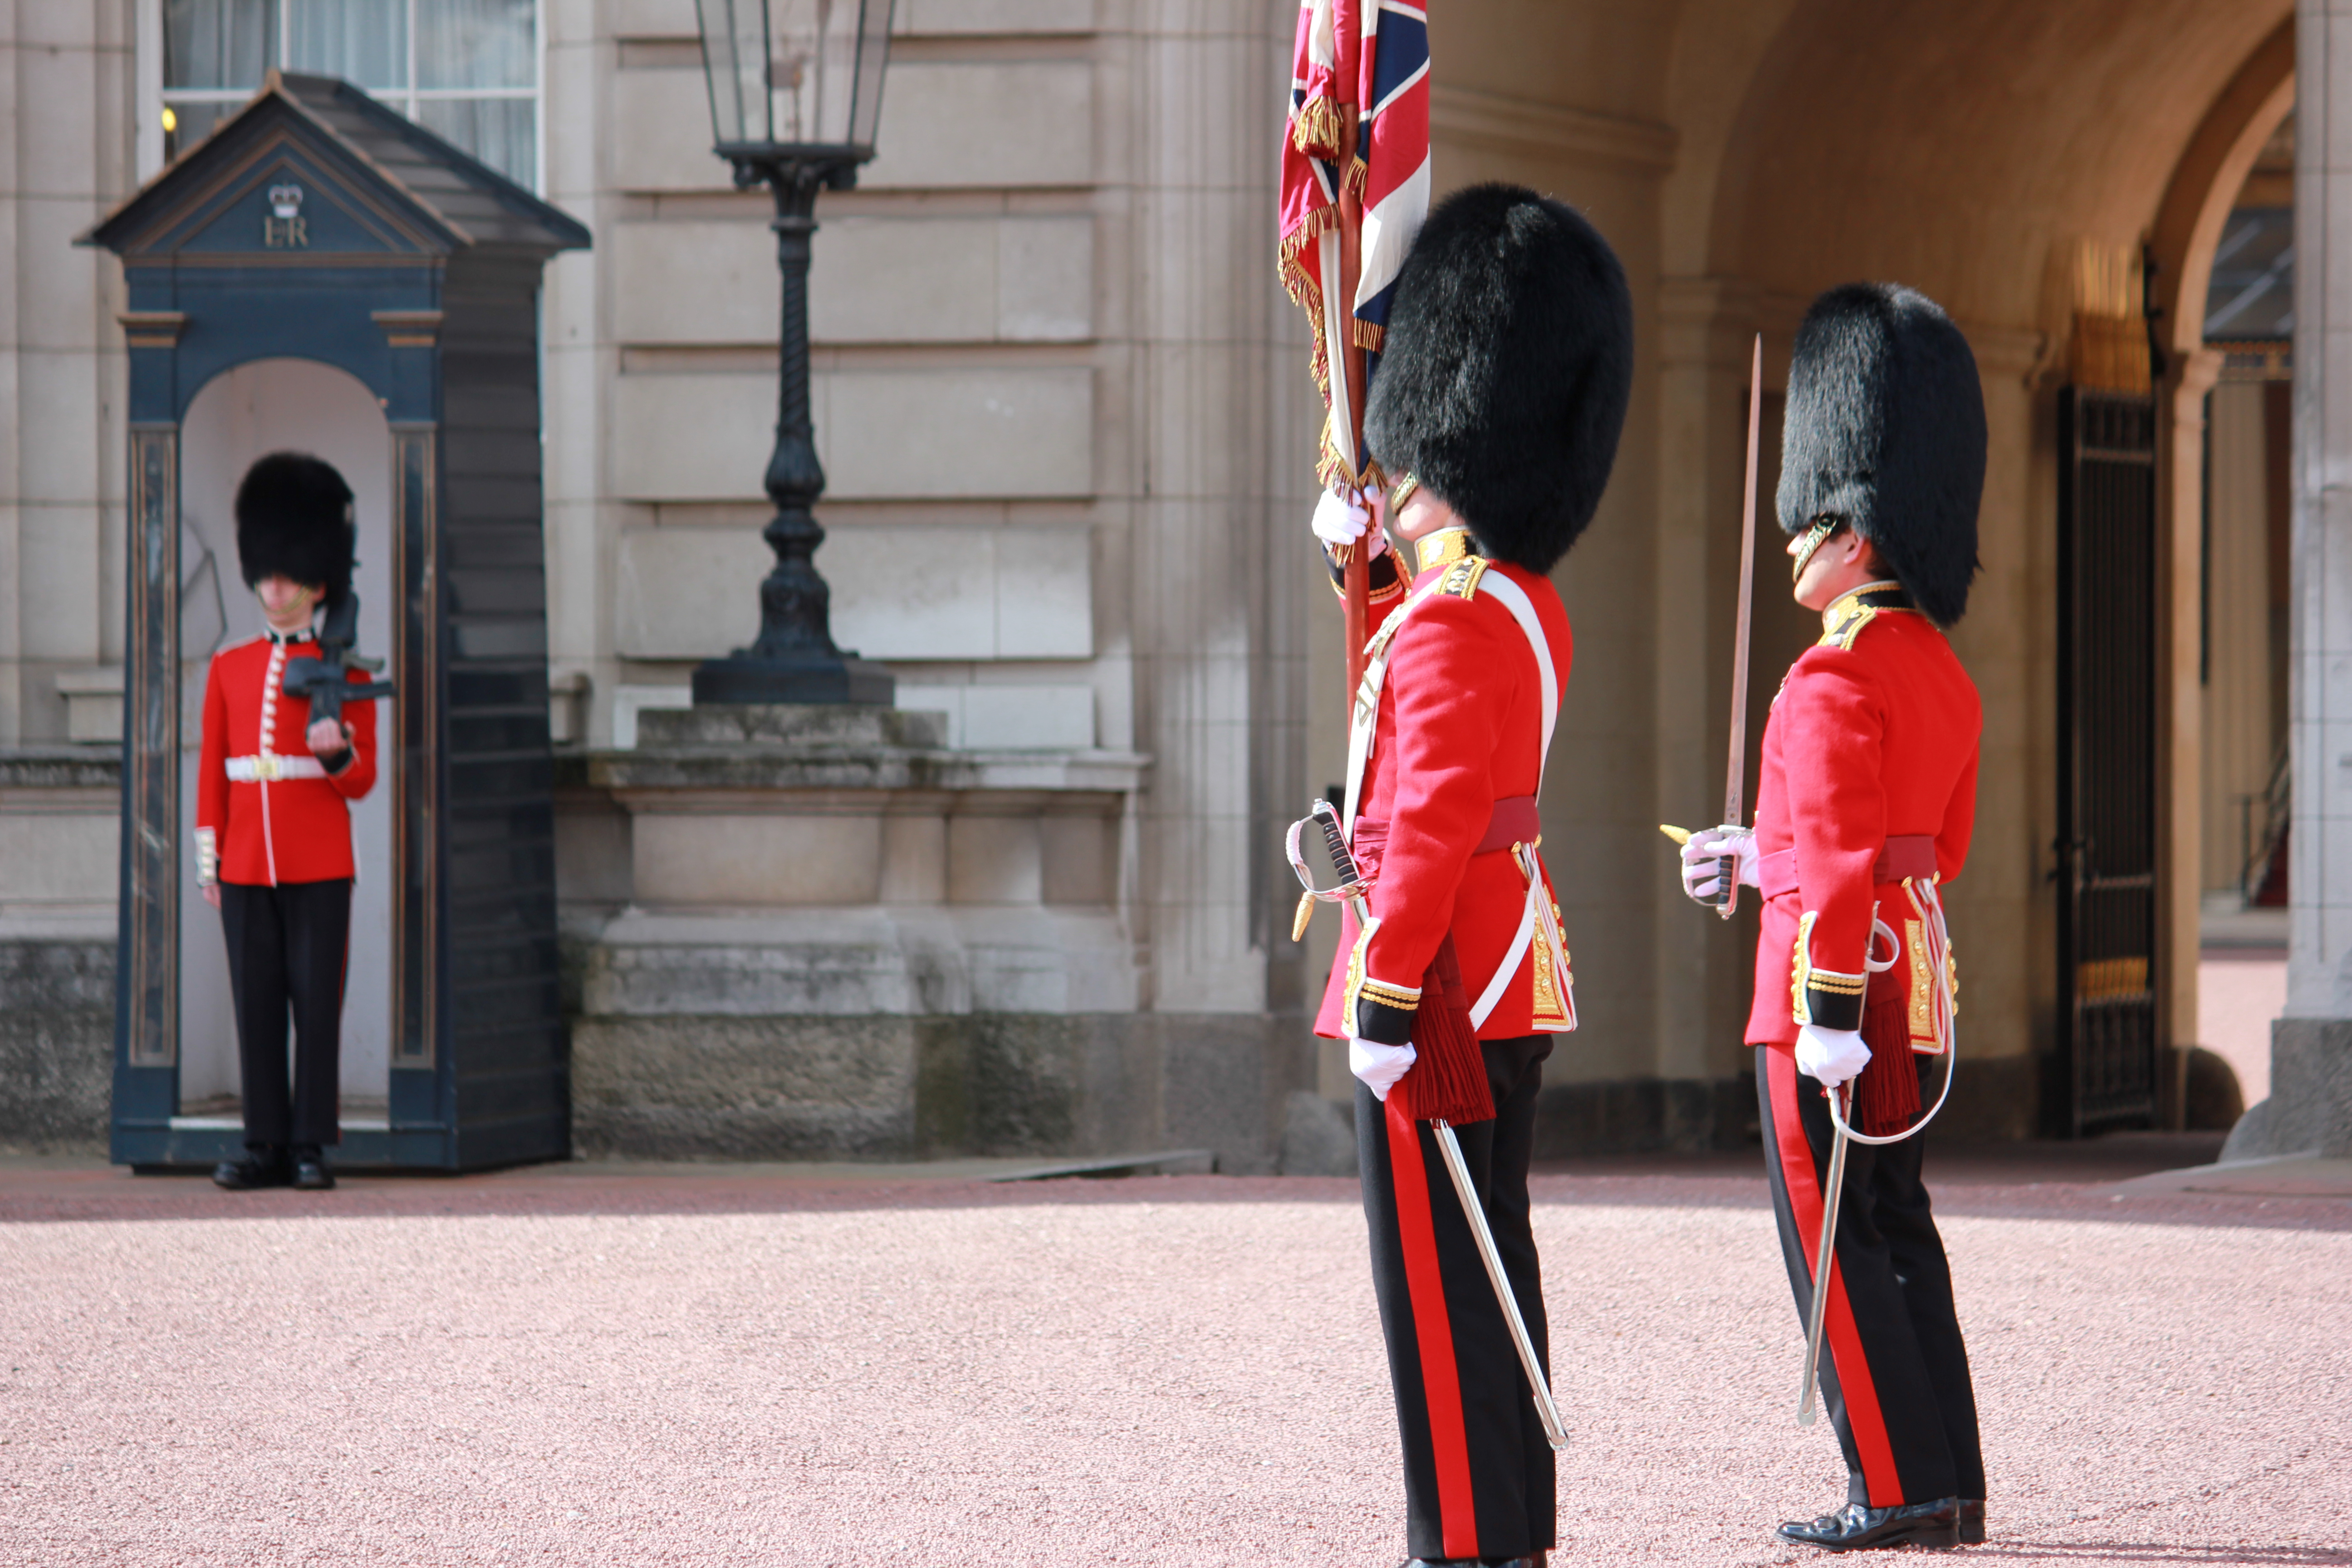 Guide to Changing of the Guard at London's Buckingham Palace